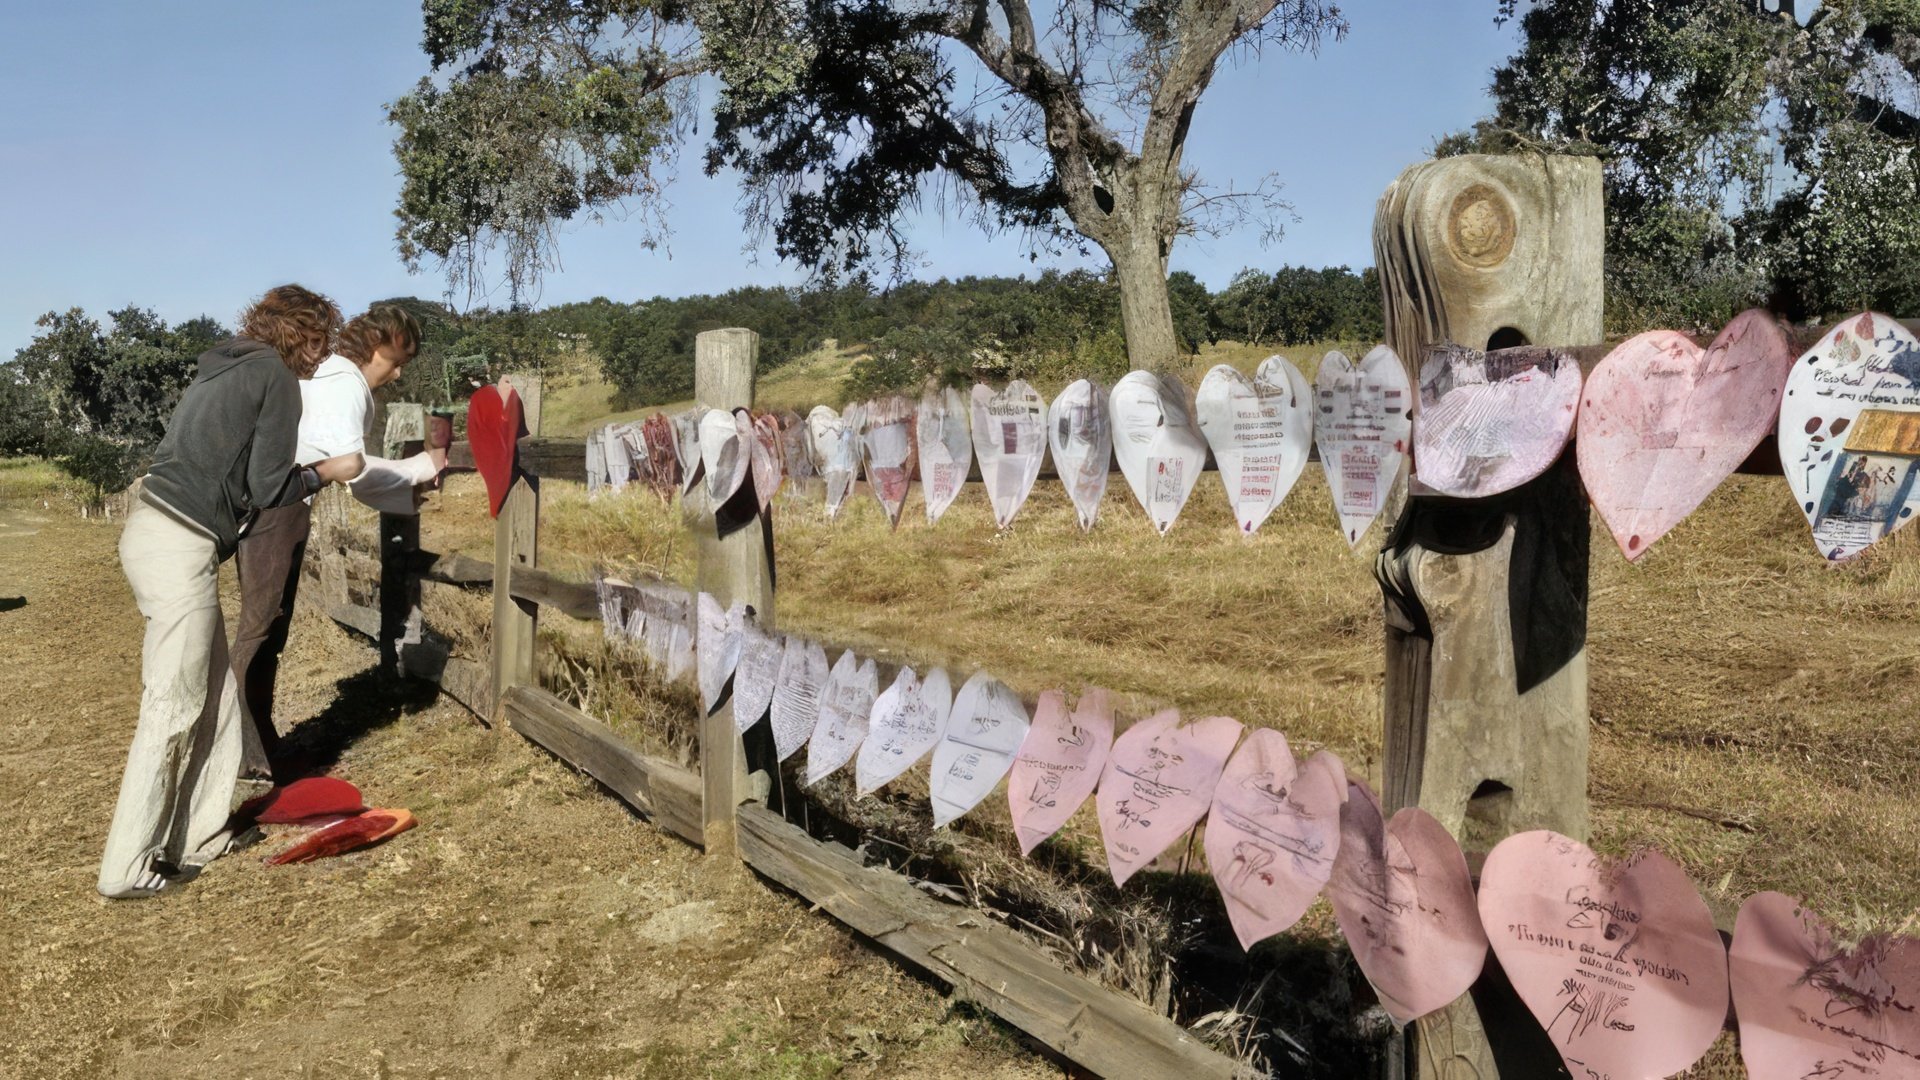 Michael Jackson's fans decorate the idol's ranch as a sign of support